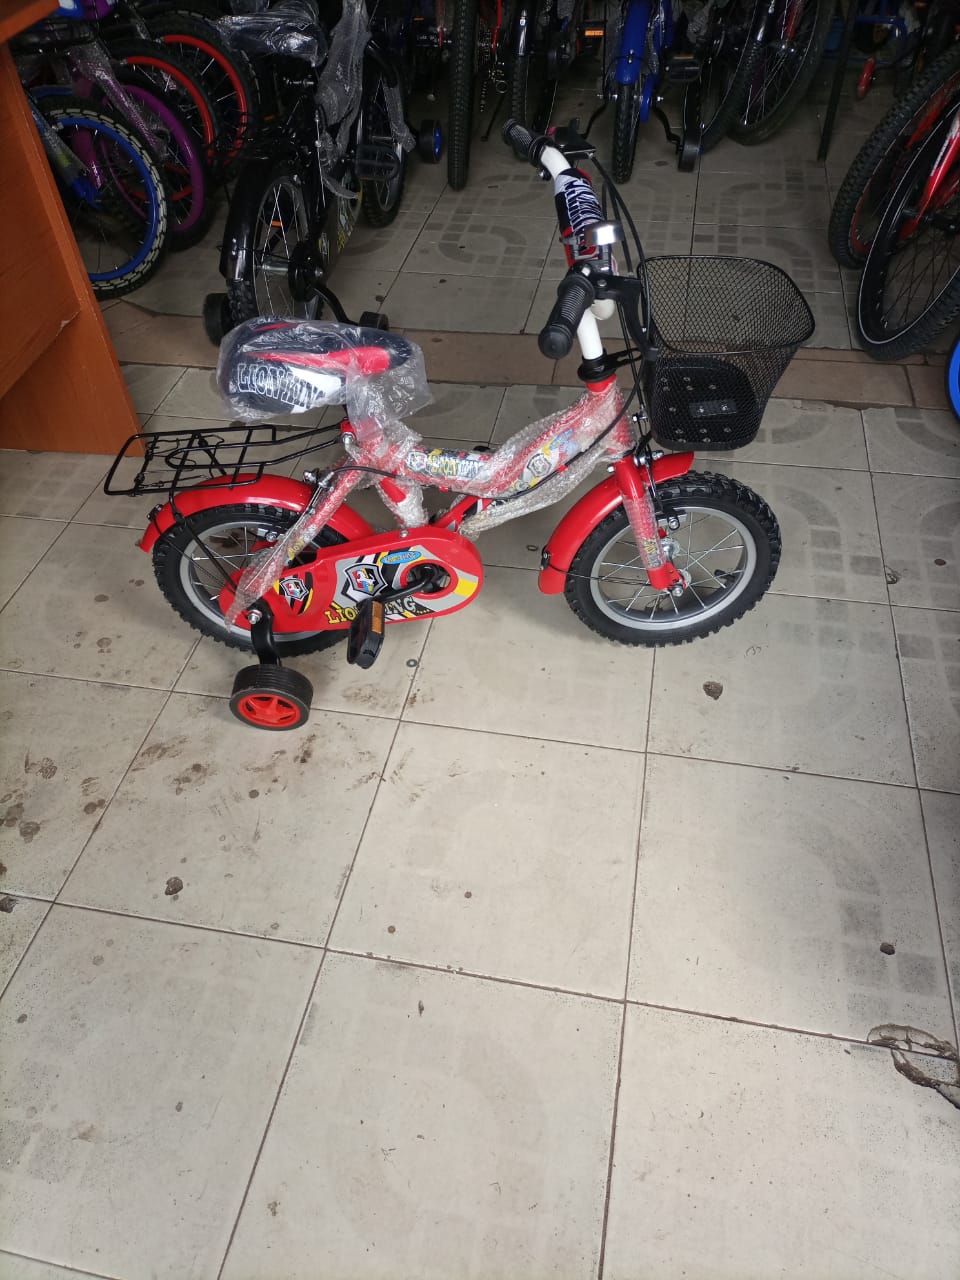 New Lion King Bicycle Size 12